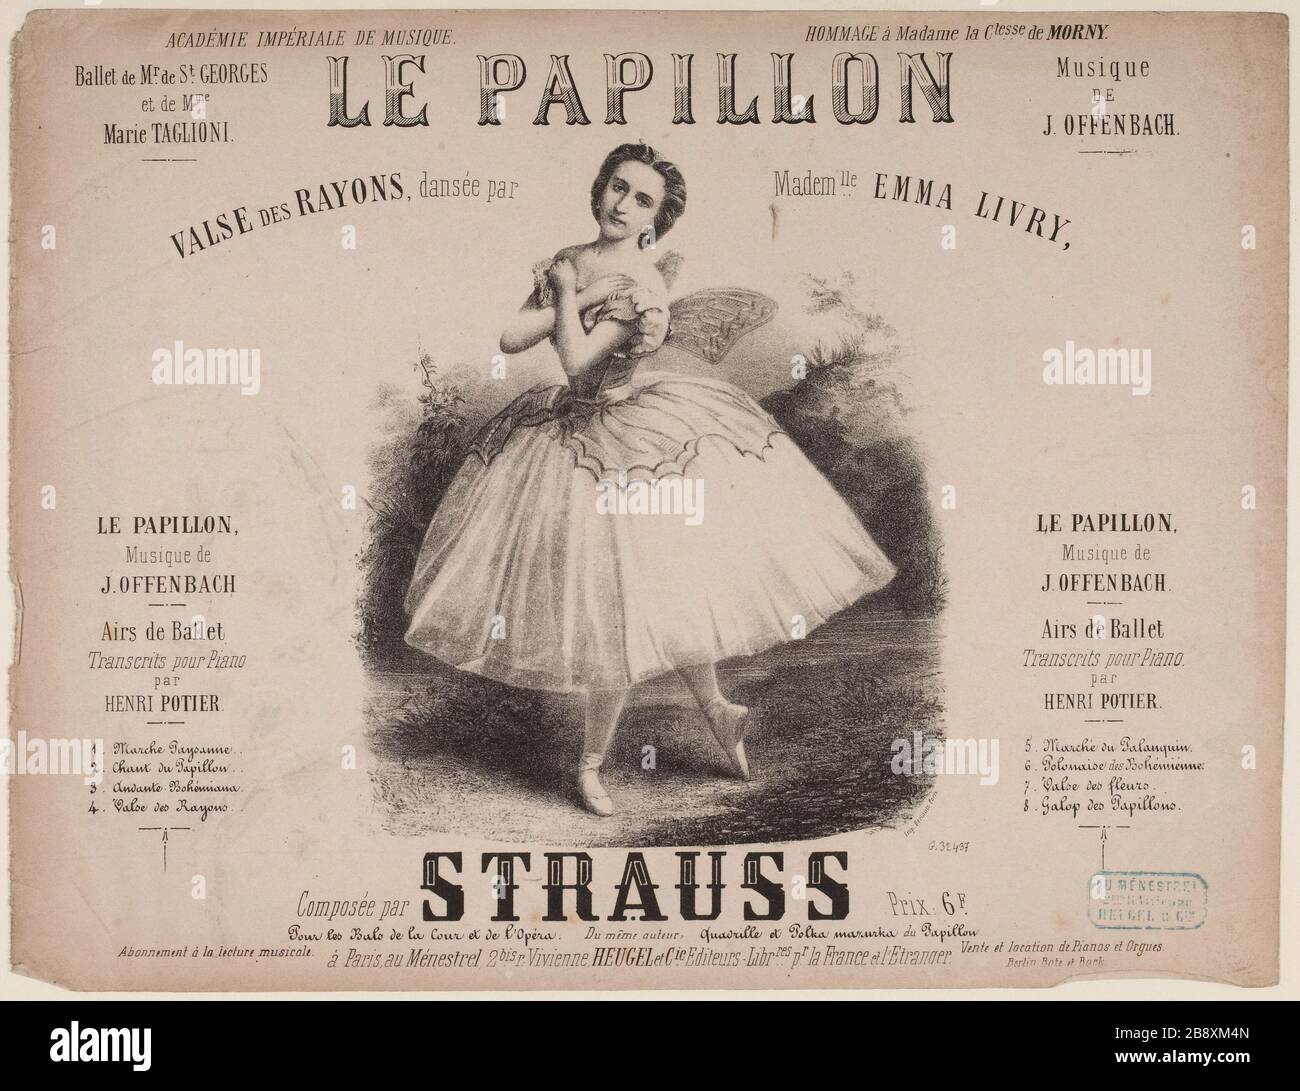 Le Papillon (ray waltz). waltz score title page by Strauss, from Offenbach  Stock Photo - Alamy